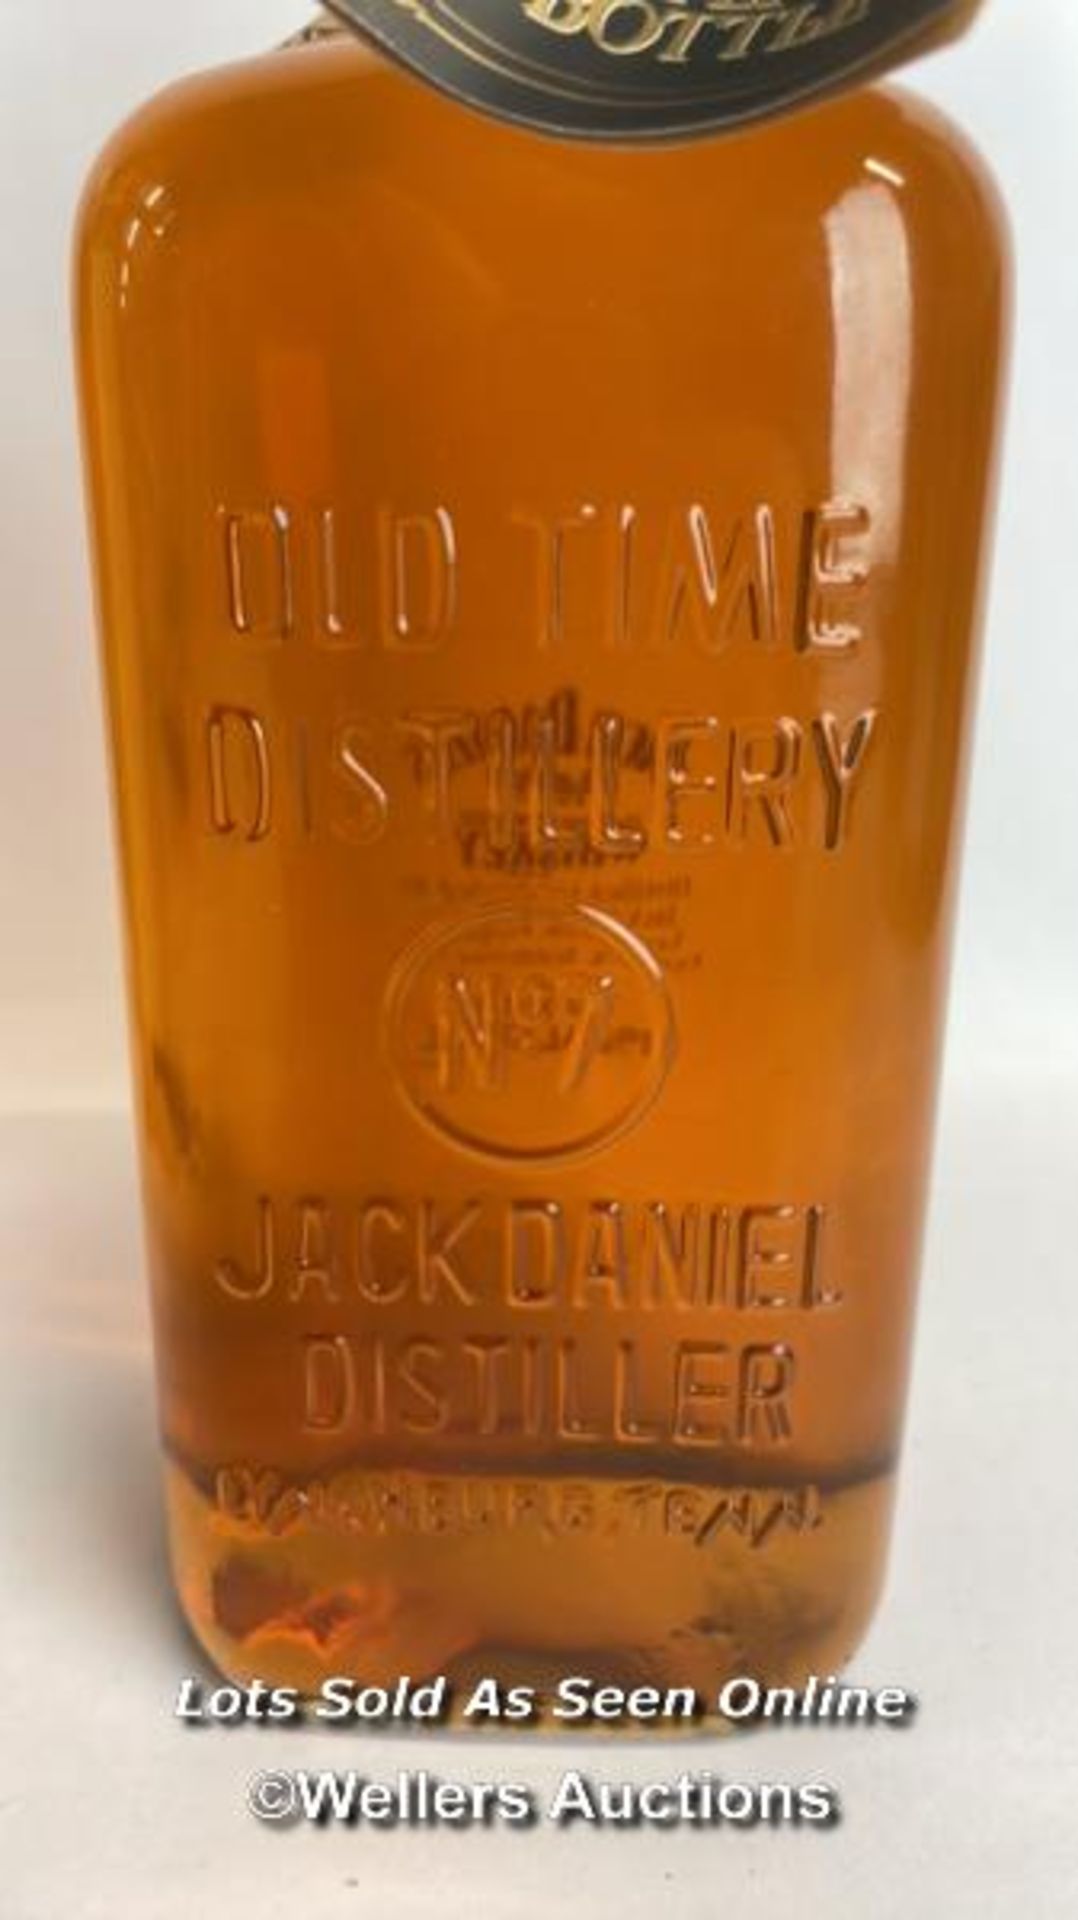 1895 Jack Daniels Replica Bottle, Old No.7 Brand, Old Time Tennessee Whiskey, 1L, 43% vol / Please - Bild 5 aus 7